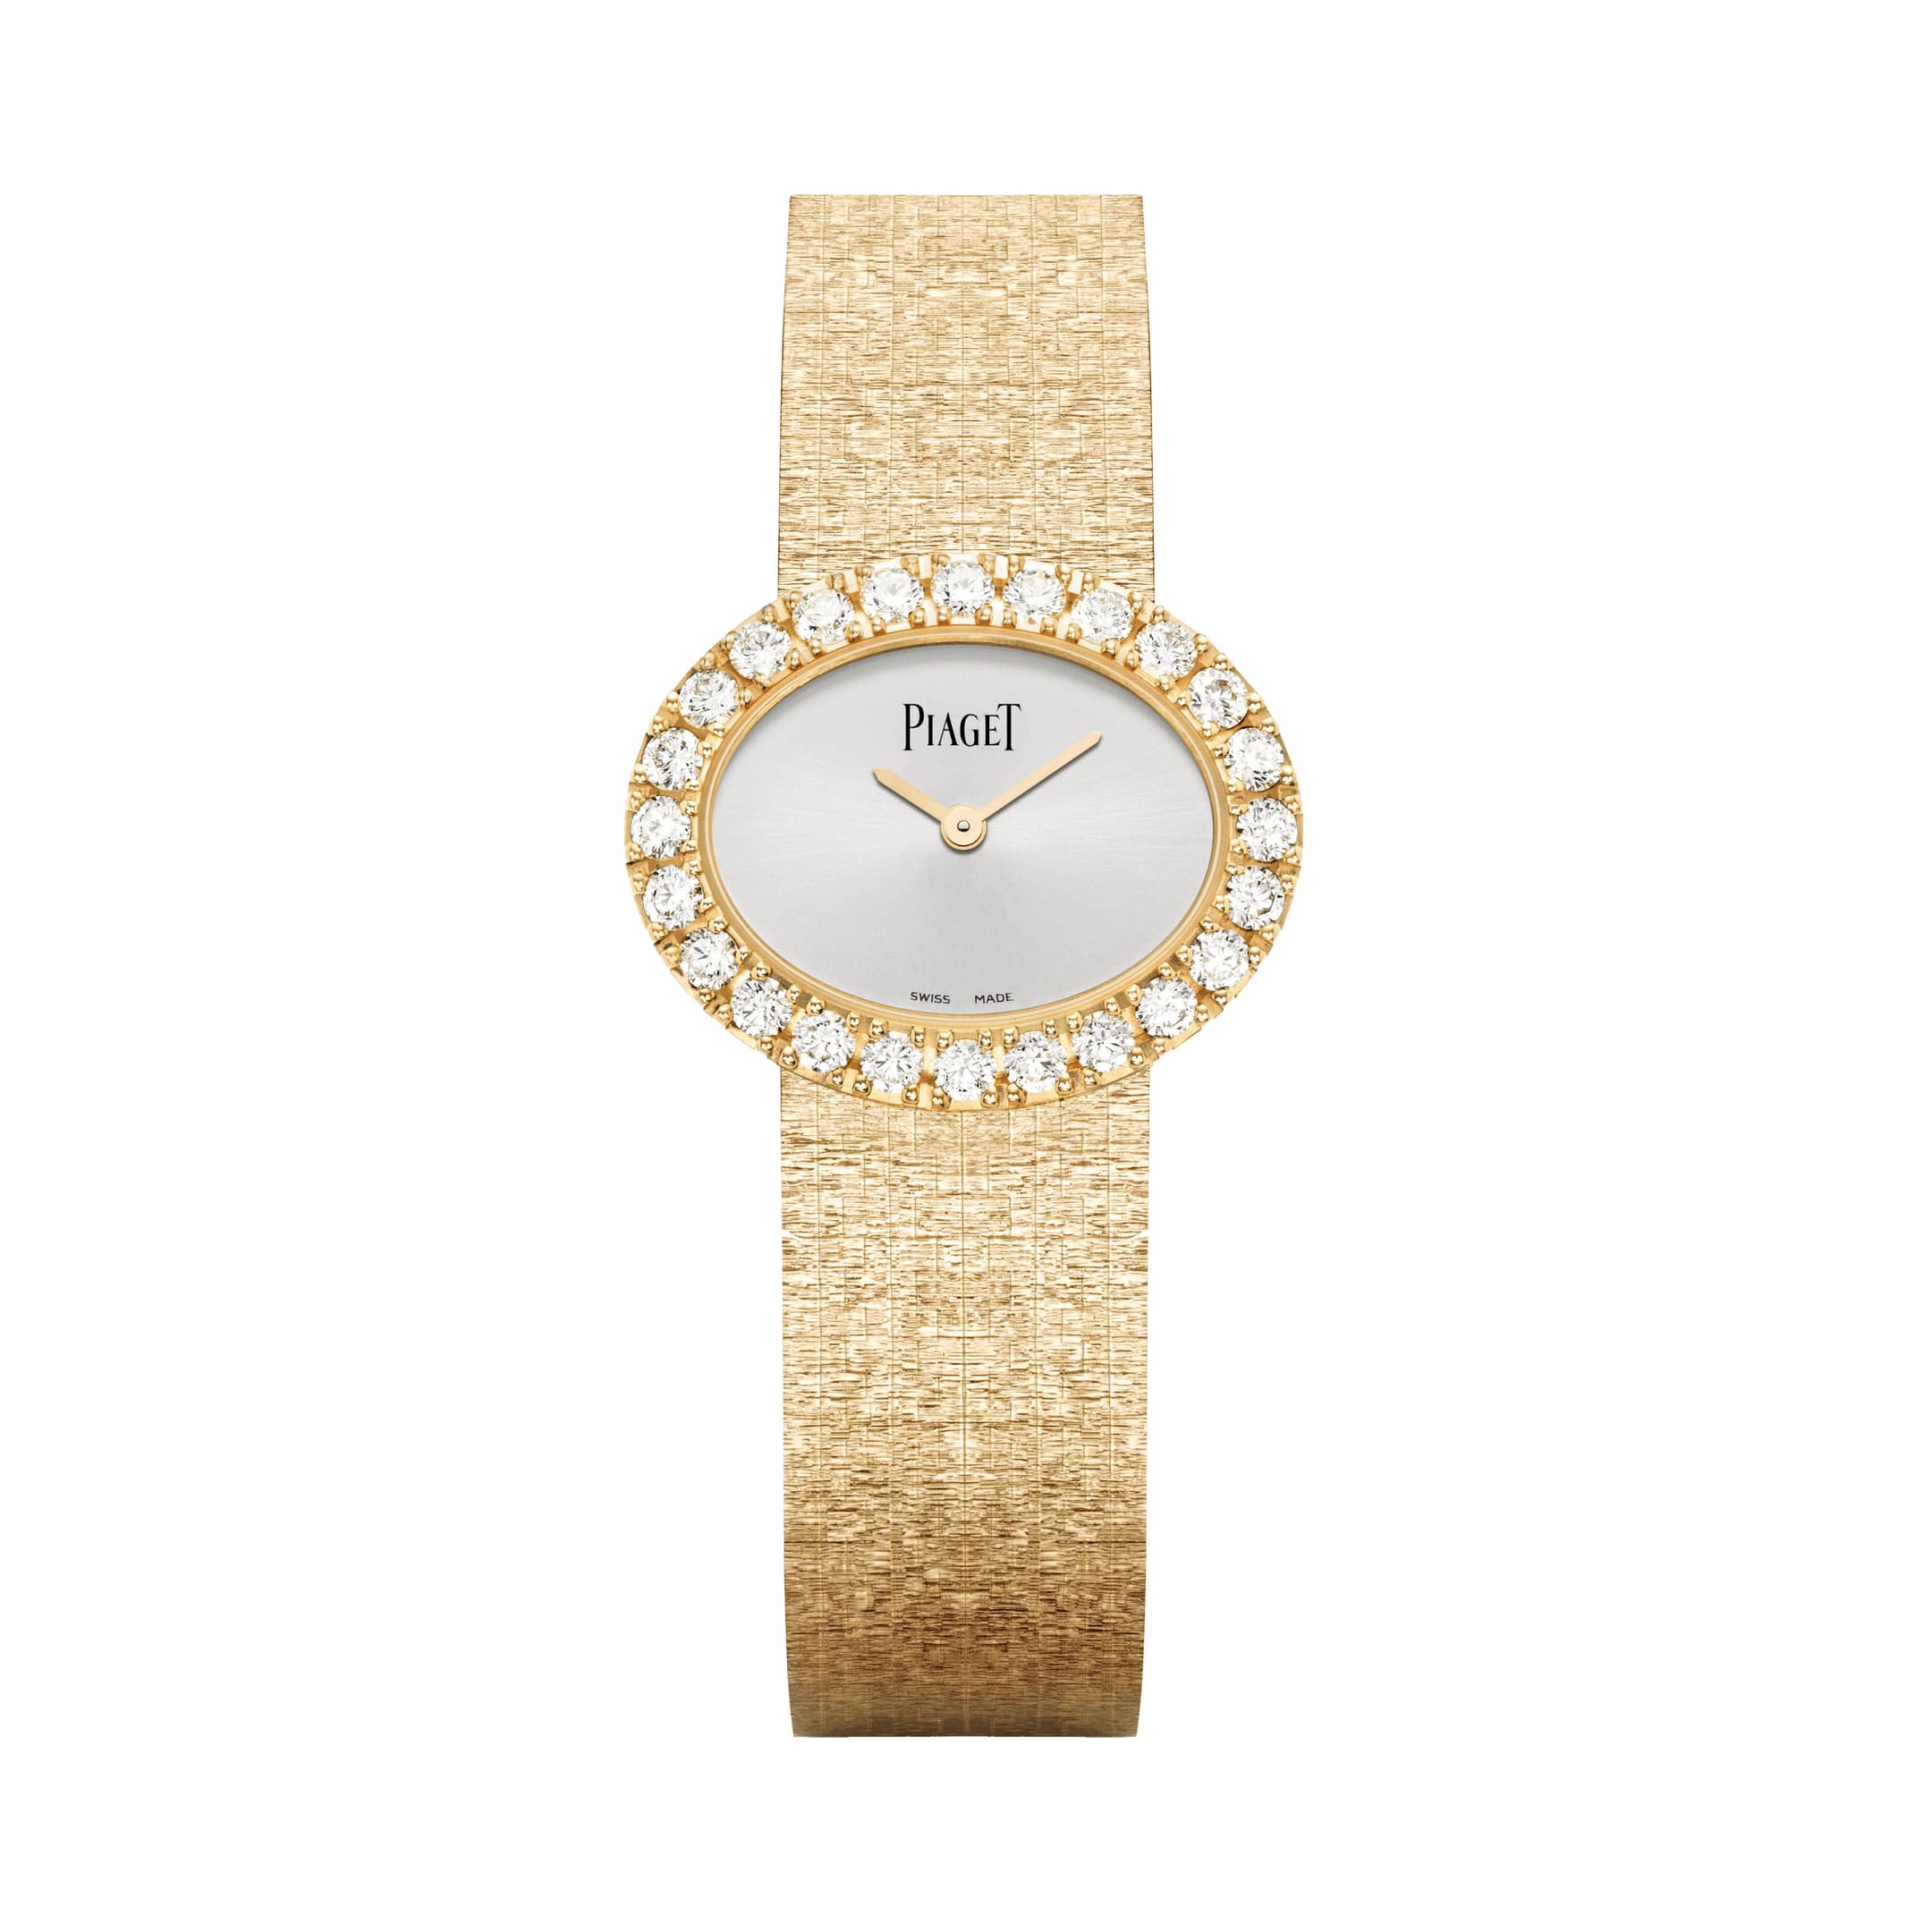 The new golden age of ladies' watches